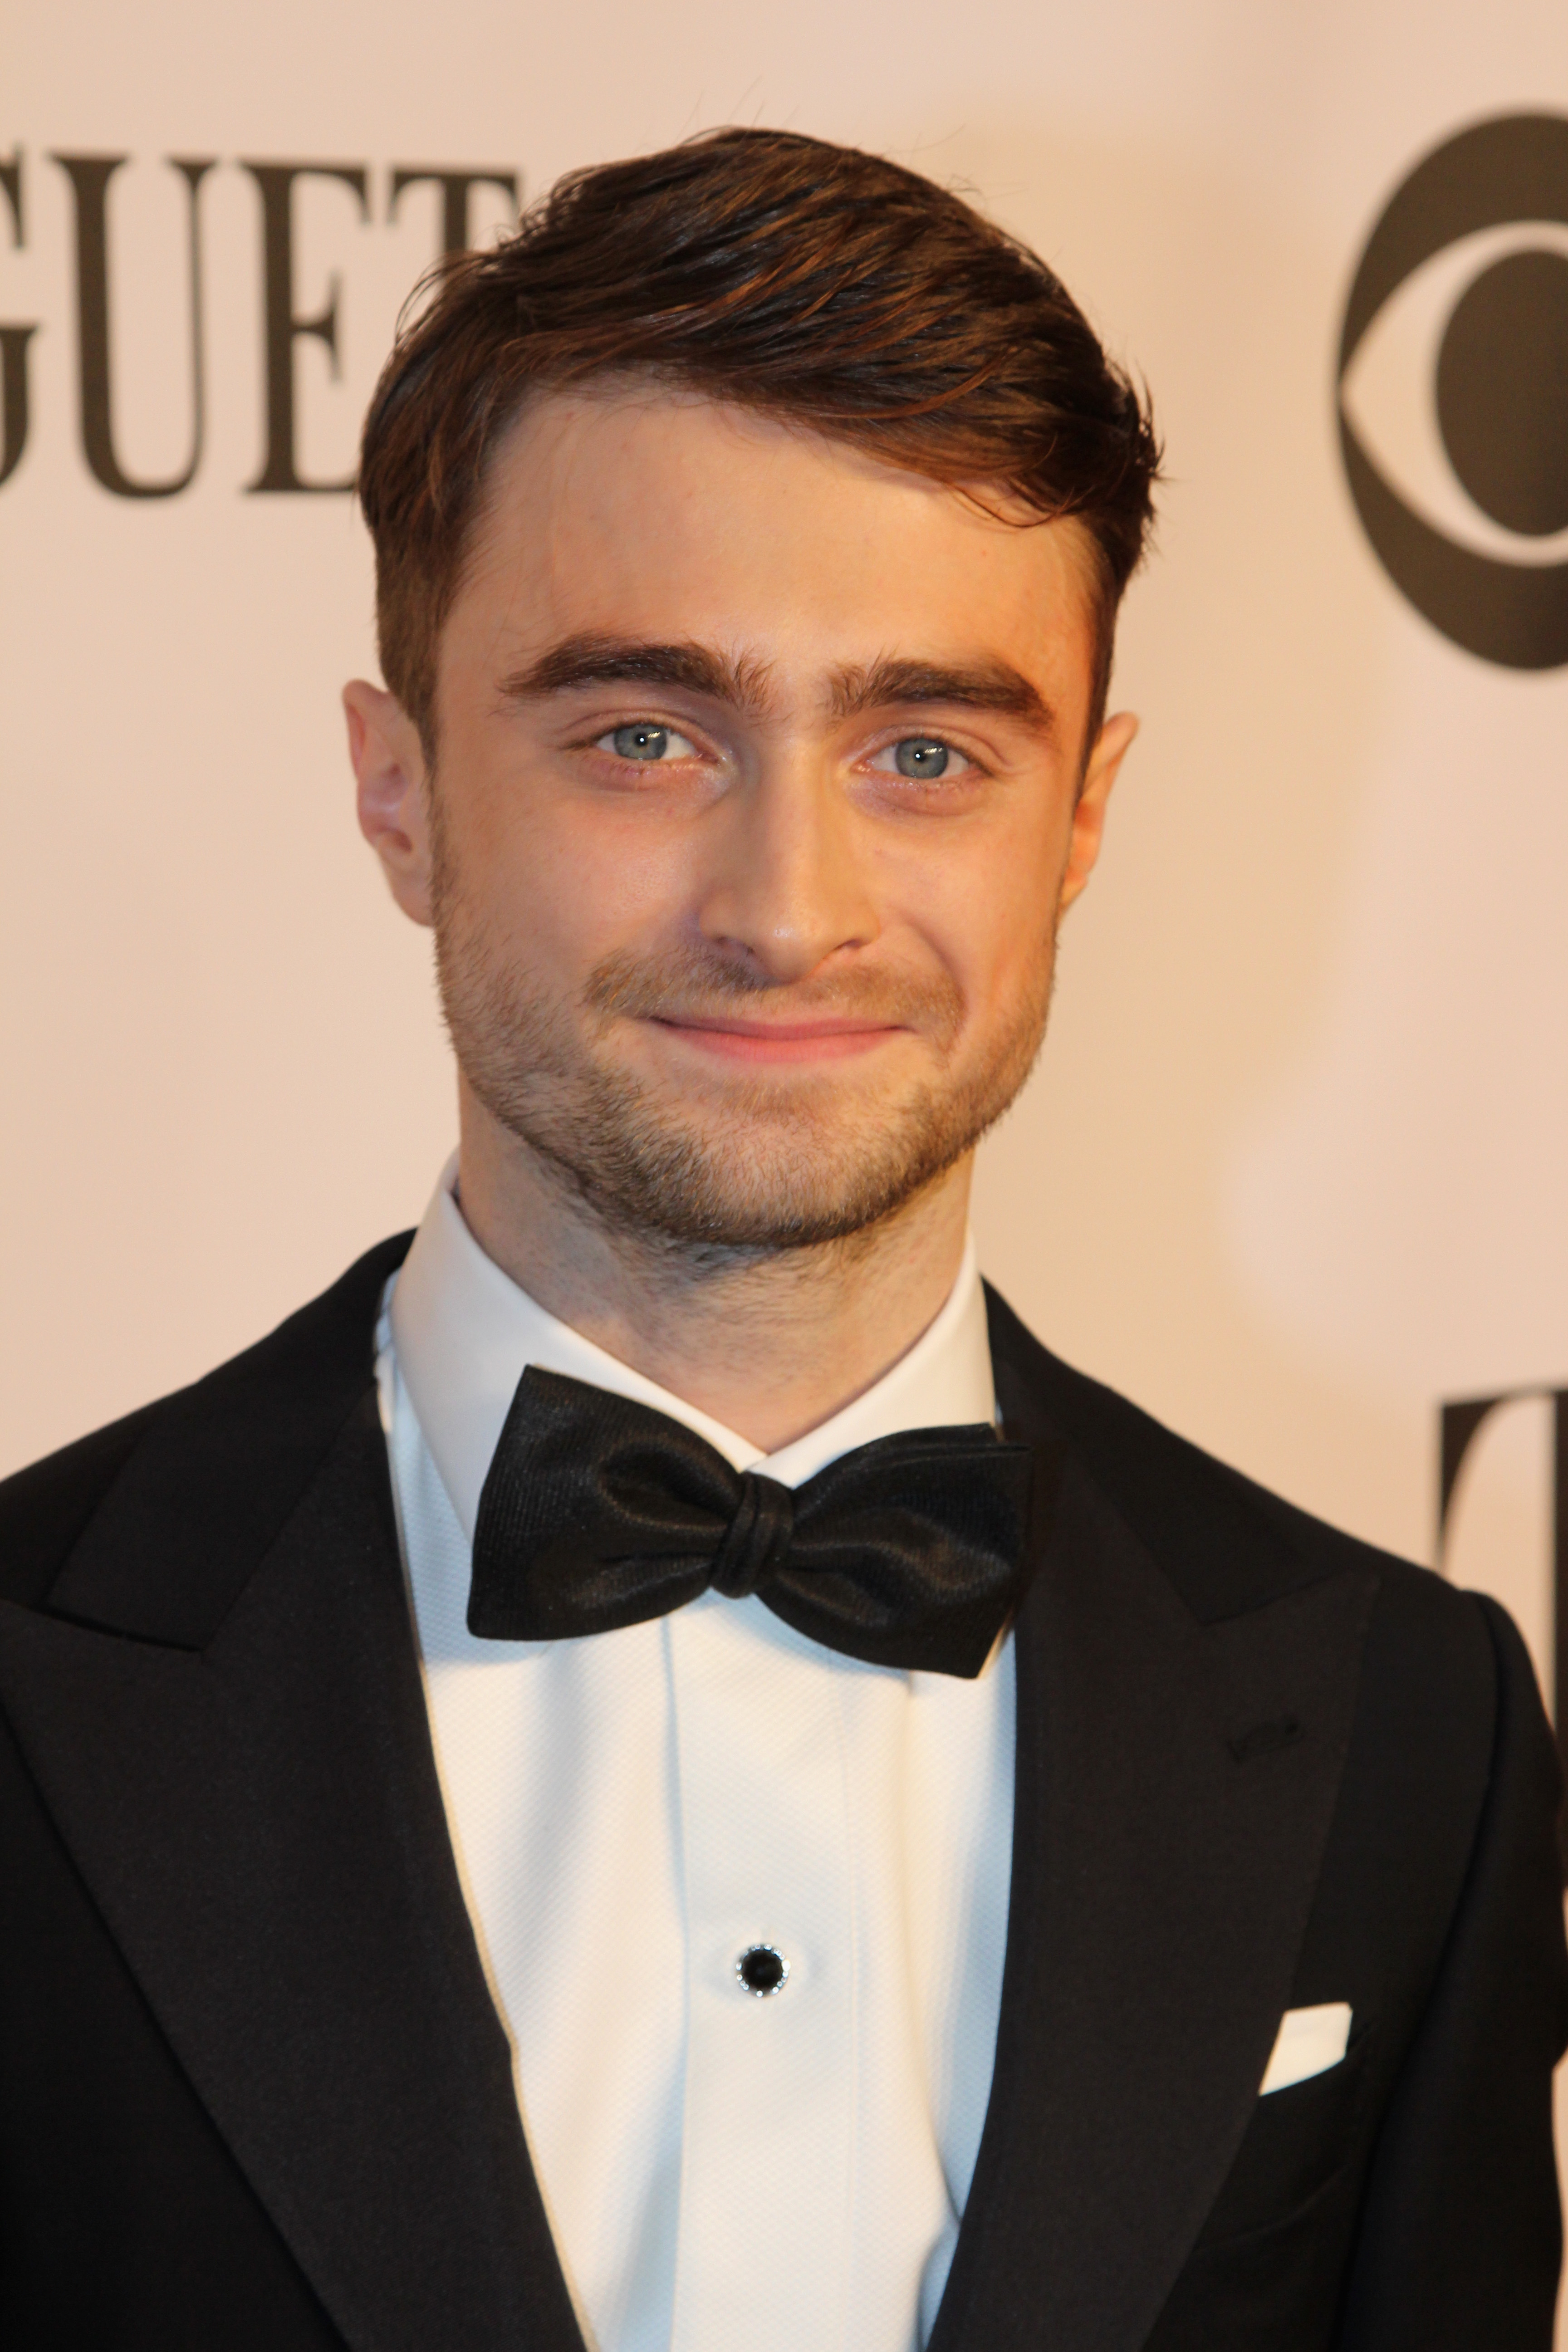 Daniel Radcliffe attends the American Theatre Wing's 68th Annual Tony Awards at Radio City Music Hall on June 8, 2014 in New York City. (Bruce Glikas—FilmMagic)